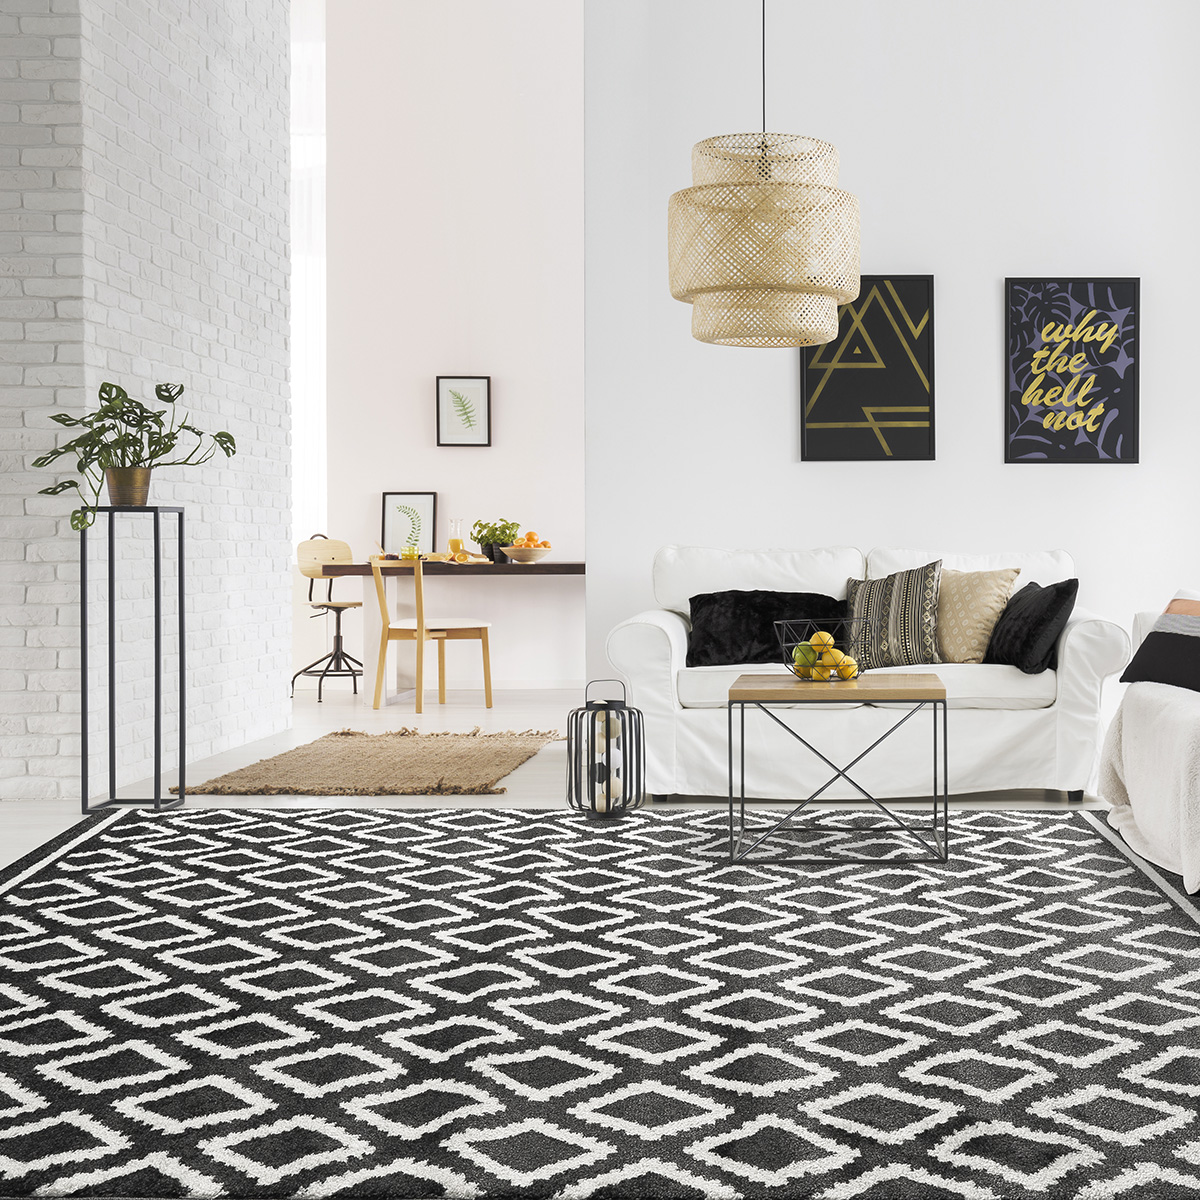 Apartment,With,White,Brick,Wall,,Sofa,,Table,And,Pattern,Rug